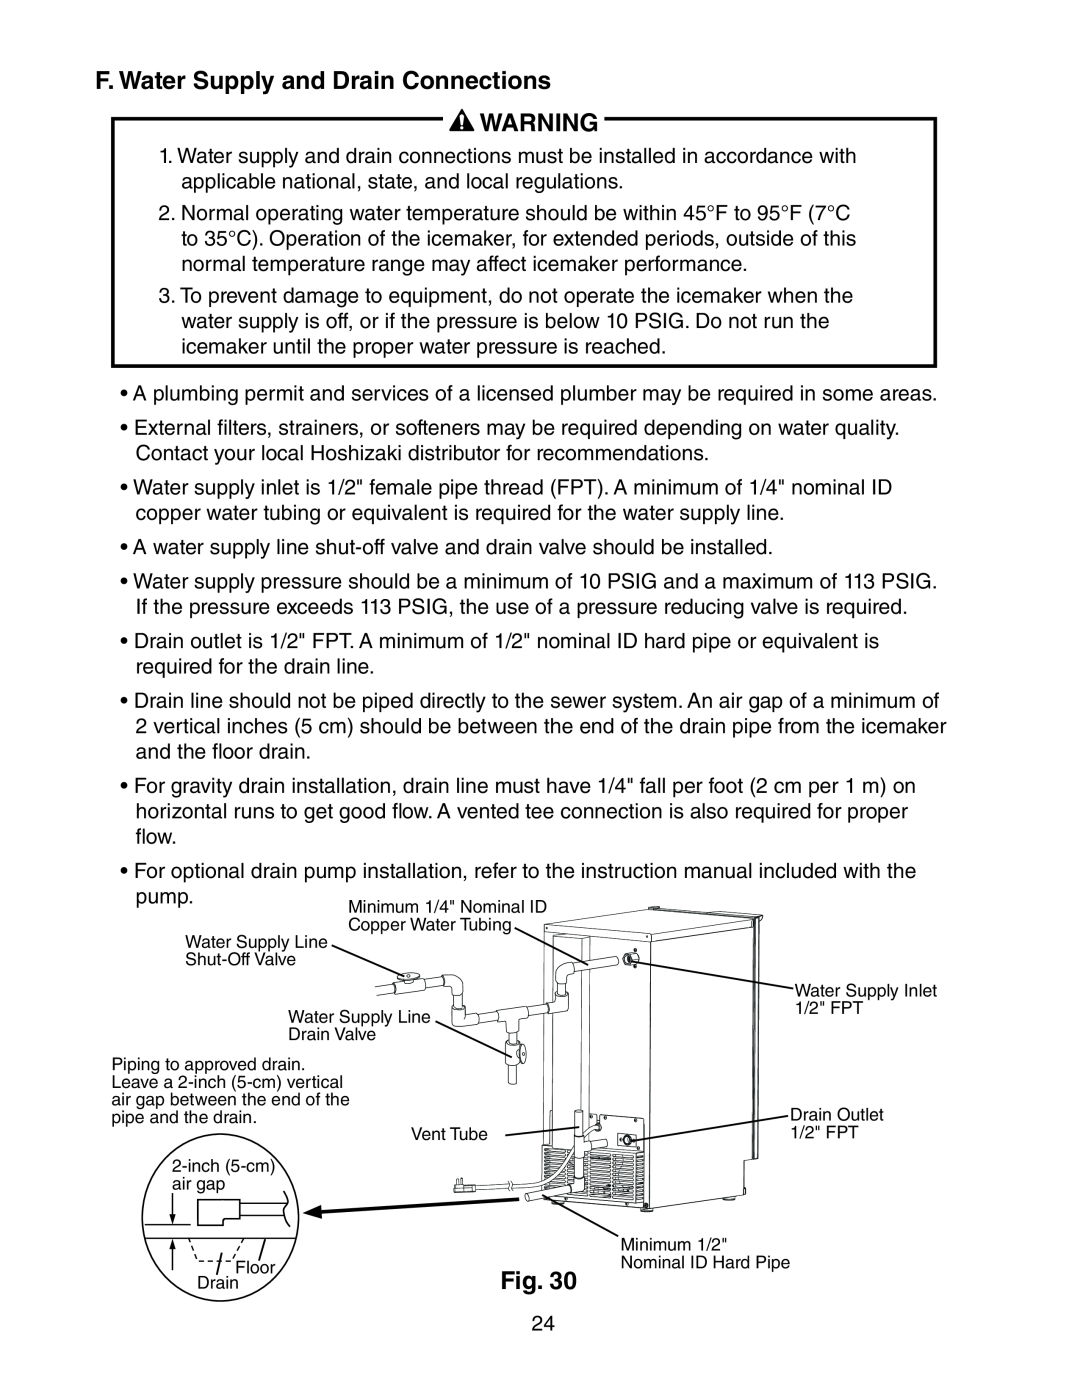 Hoshizaki AM-50BAE-ADDS, AM-50BAE-DS instruction manual F. Water Supply and Drain Connections, Fig 